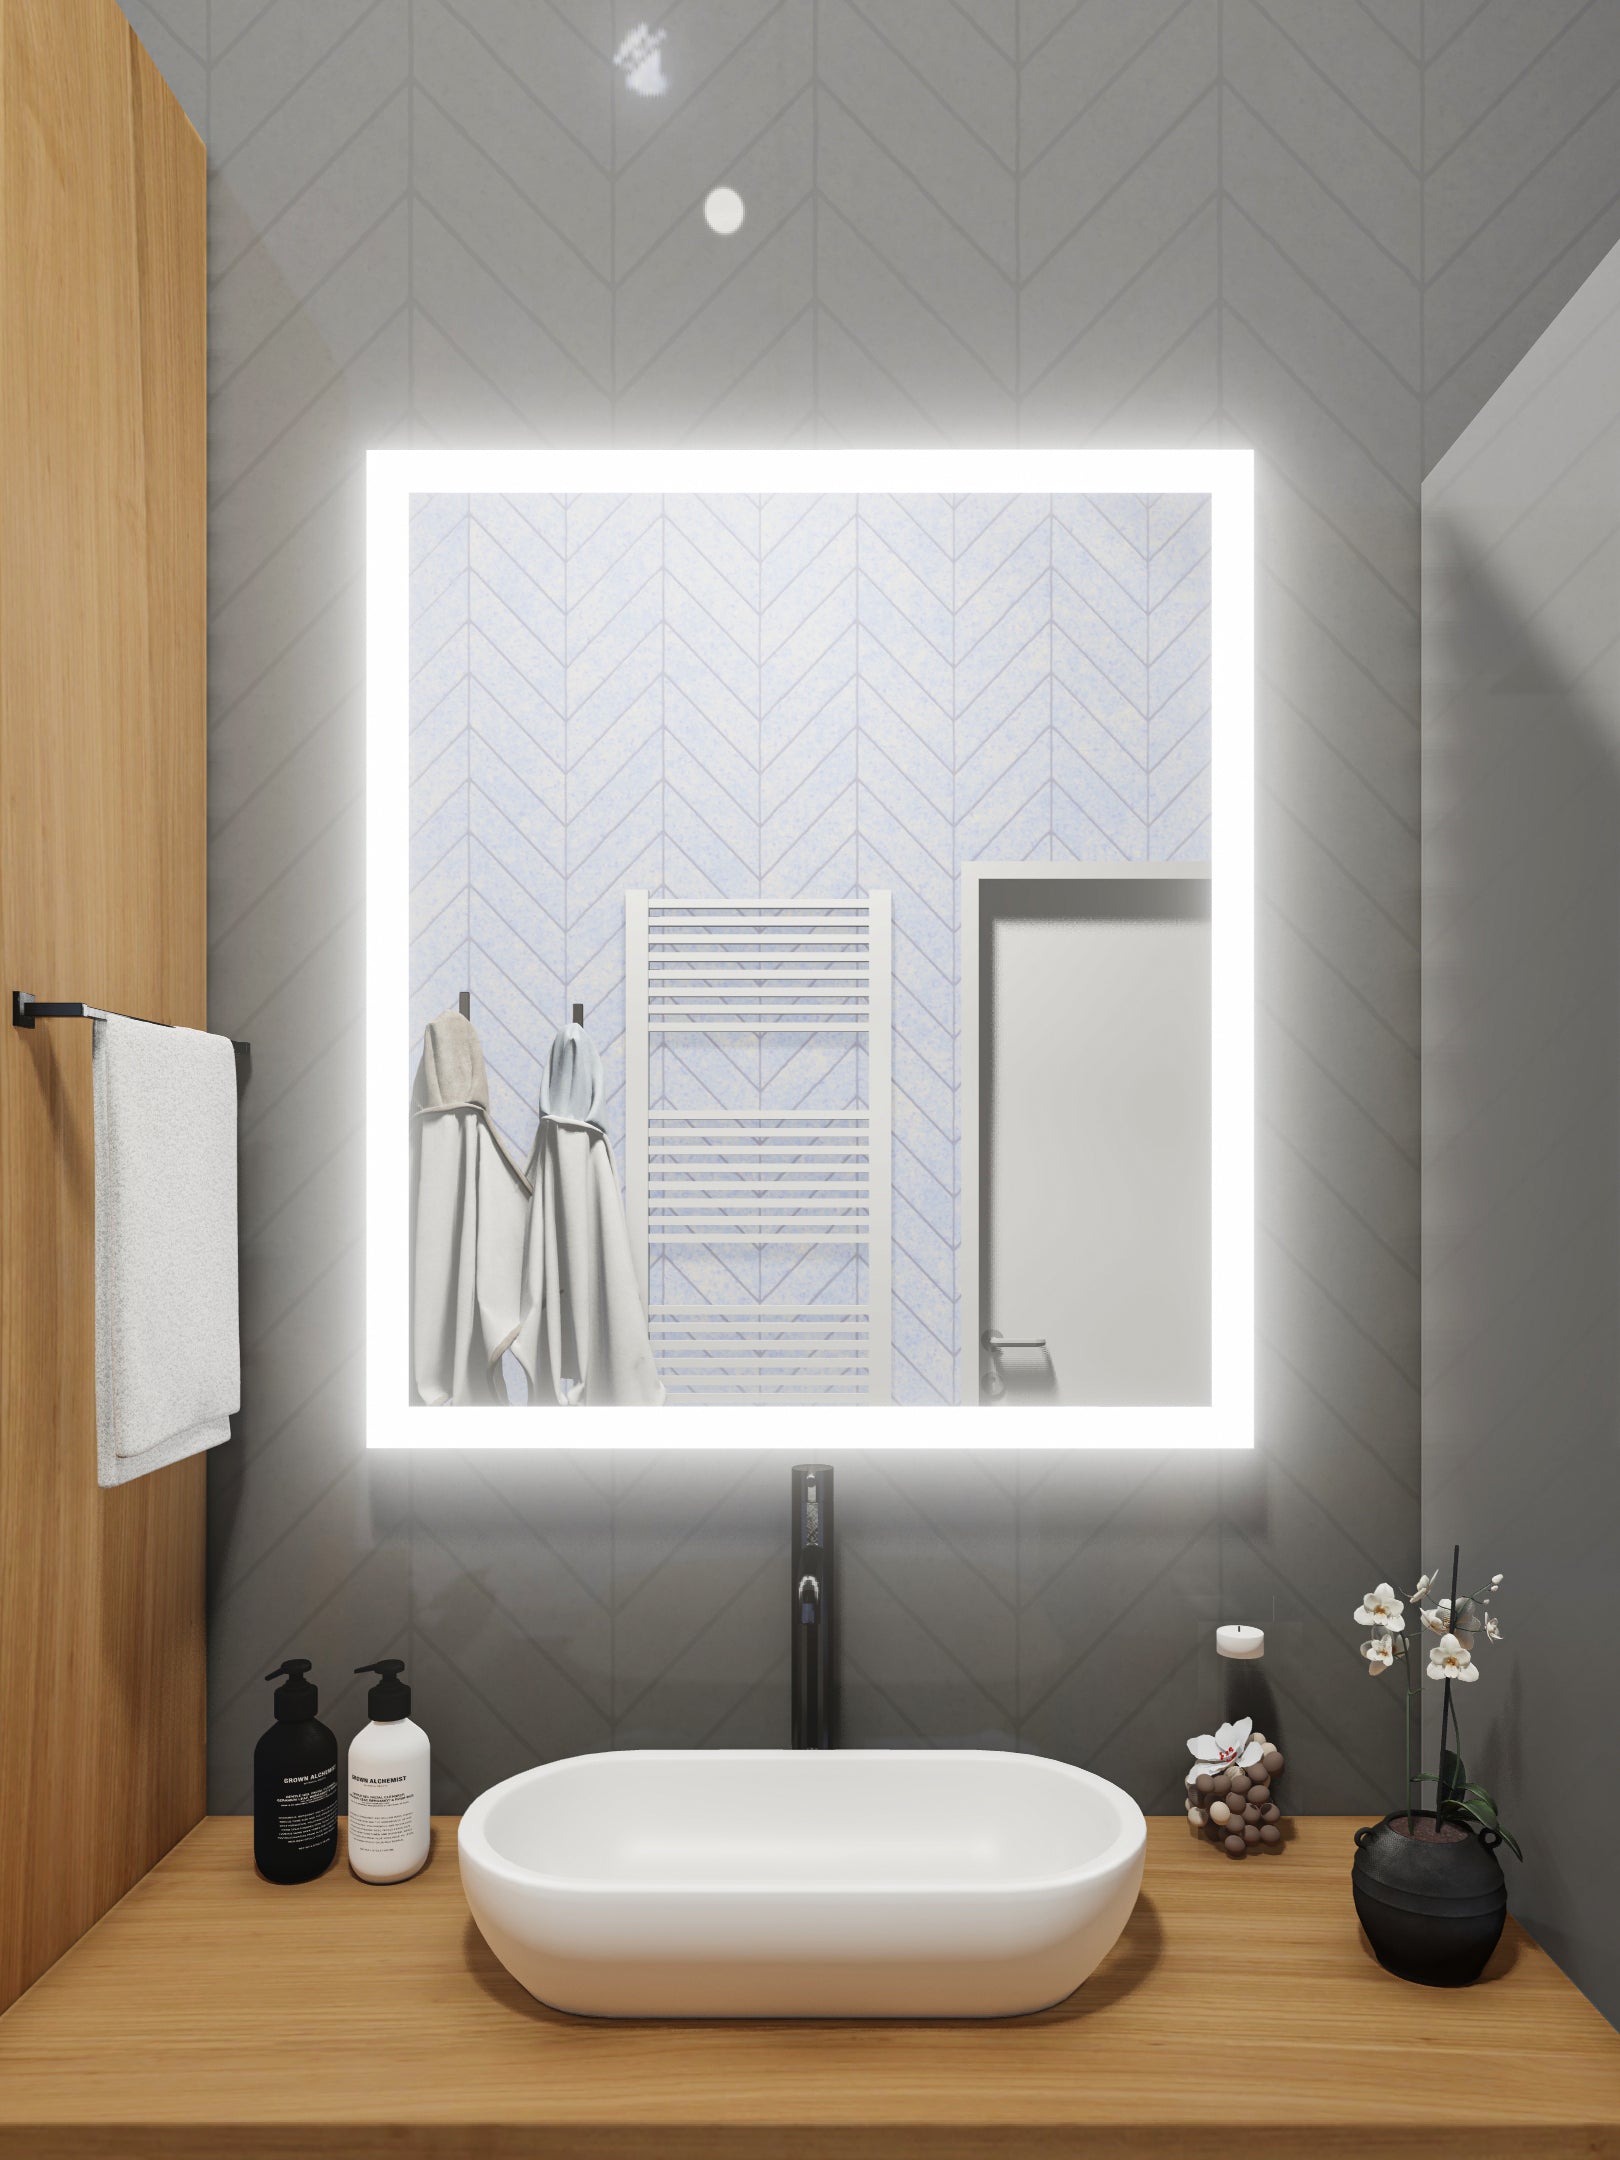 LED Mirror (Side-Lighted) 32" x 40" (or 40" x 32")